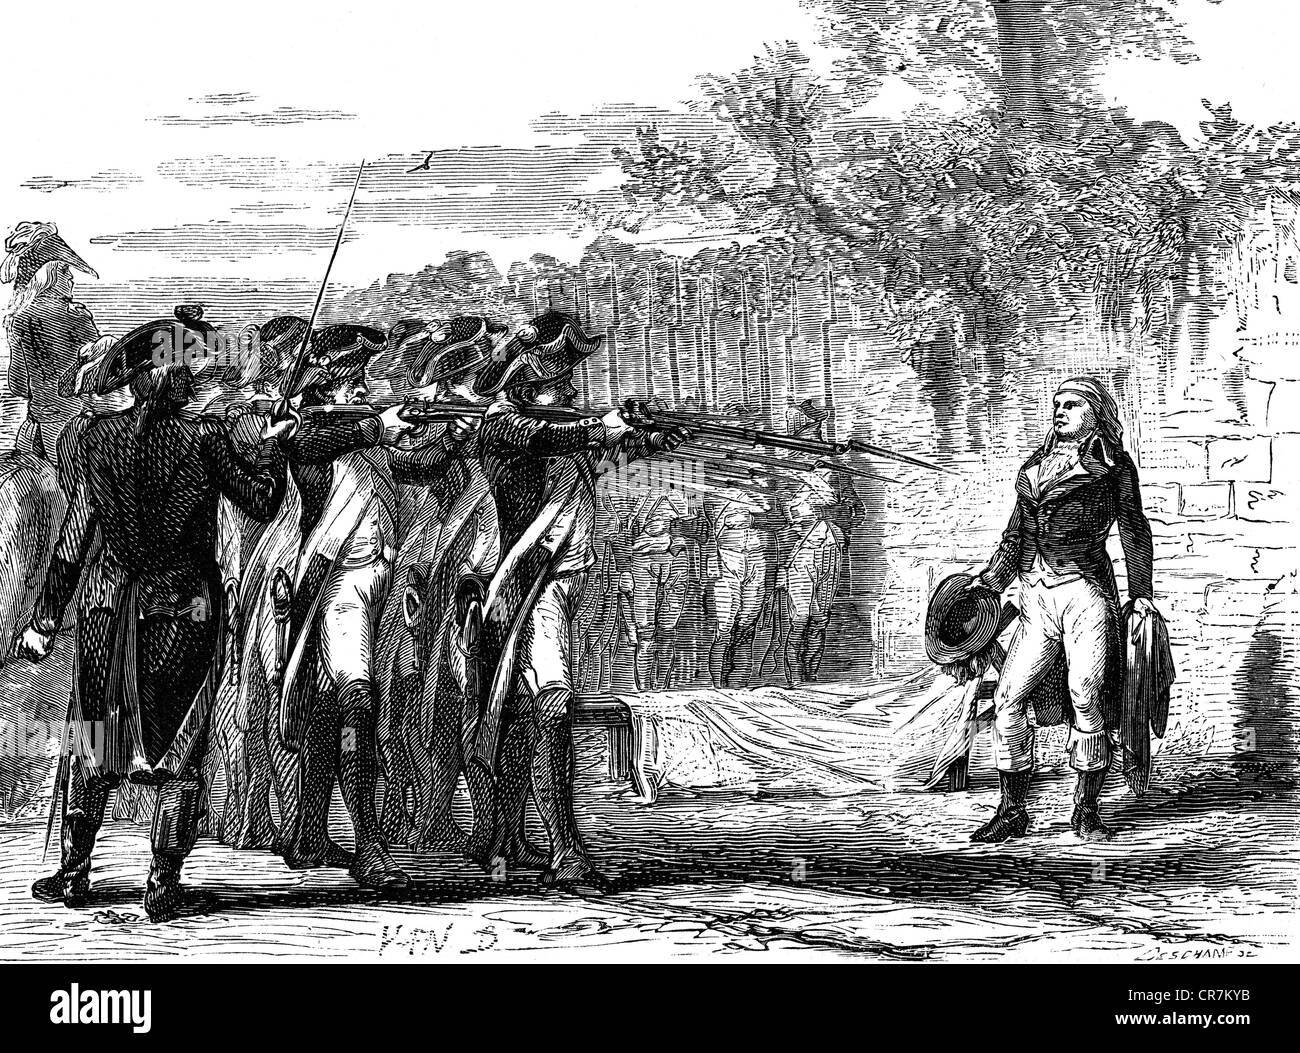 Charettes de la Contrie, Francois Athanase de, 21.4.1763 - 26.3.1796, French naval officer, leader of the Revolt in the Vendée 1793 - 1796, death, shot in Nantes, wood engraving, 19th century, Stock Photo